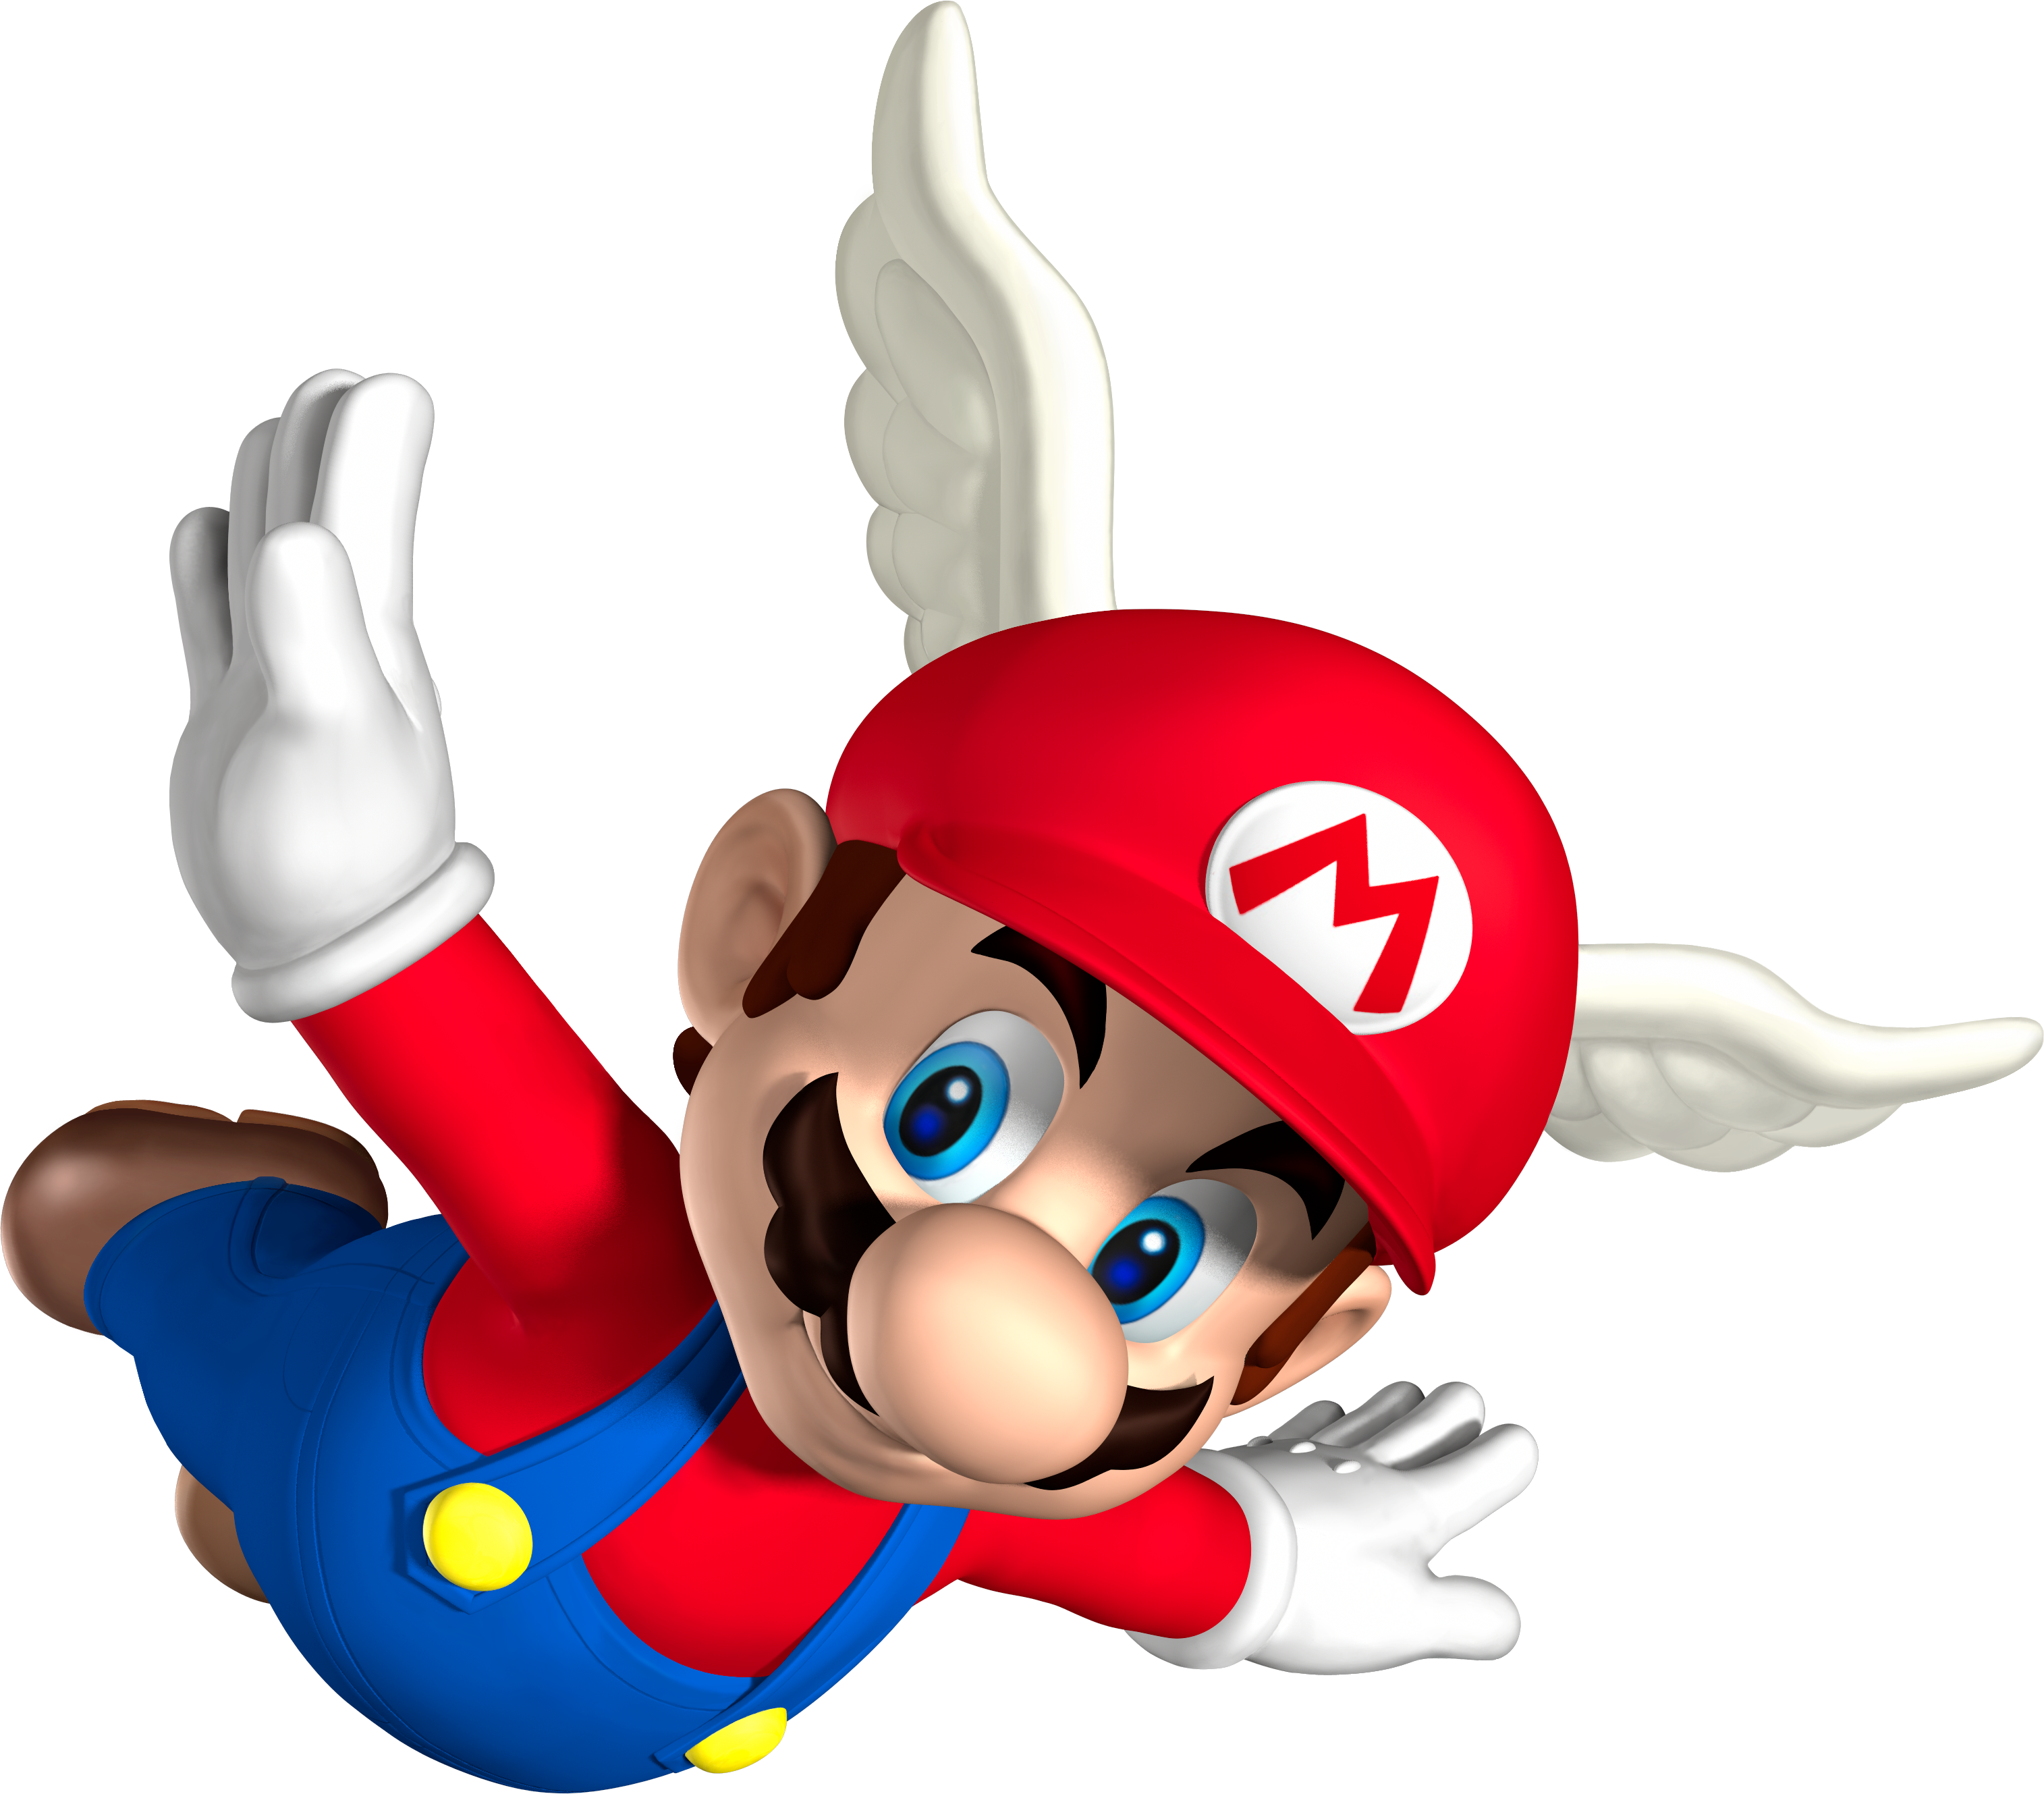 Always Getting A Little Closer To Asterix - Super Mario 64 Ds (3029x2658)